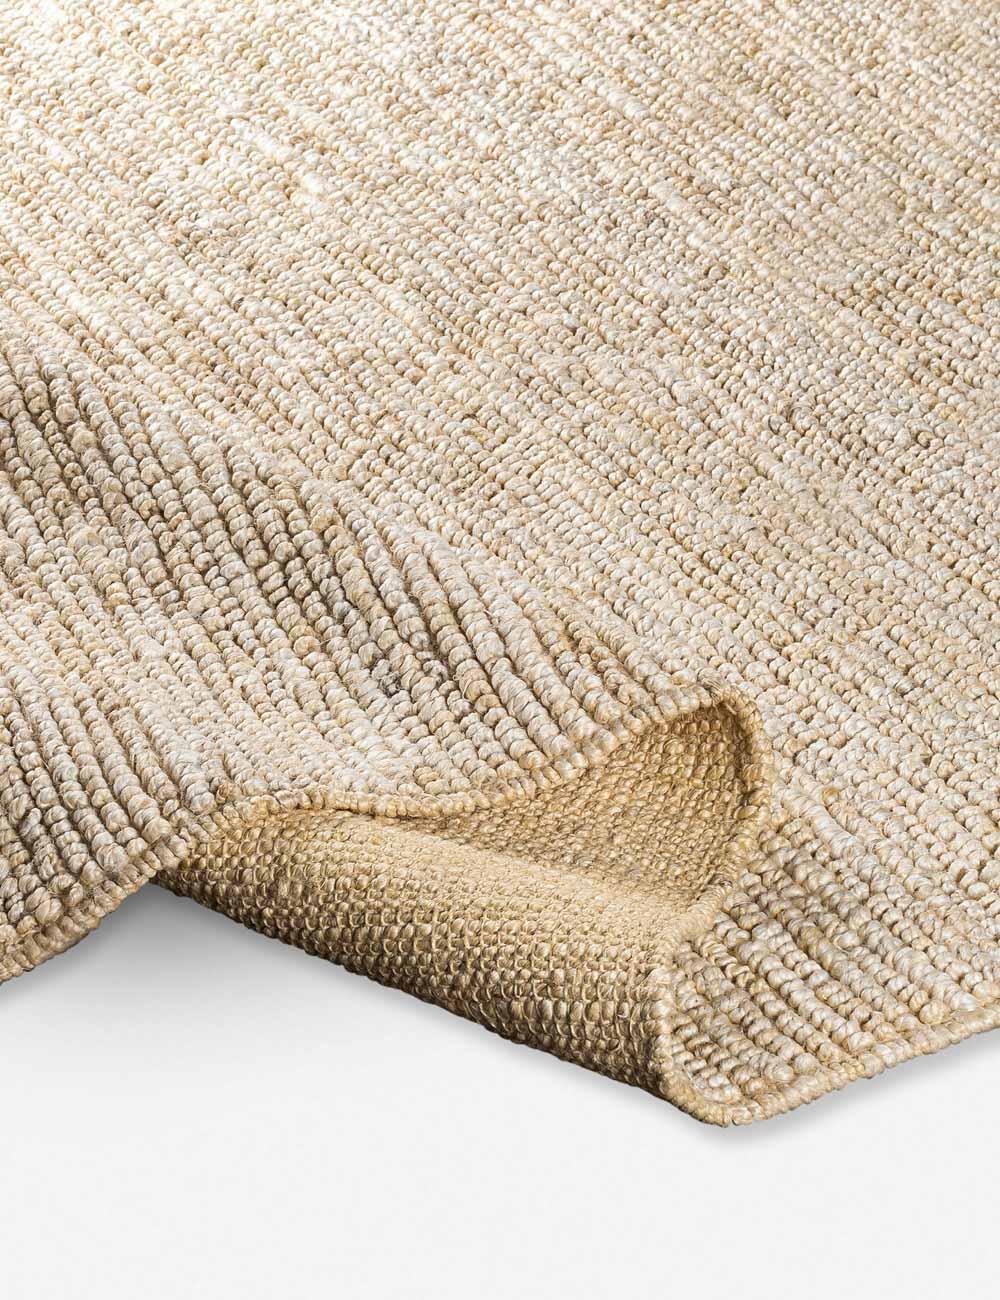 Foster Continental Handwoven Jute Area Rug - 6' x 9'